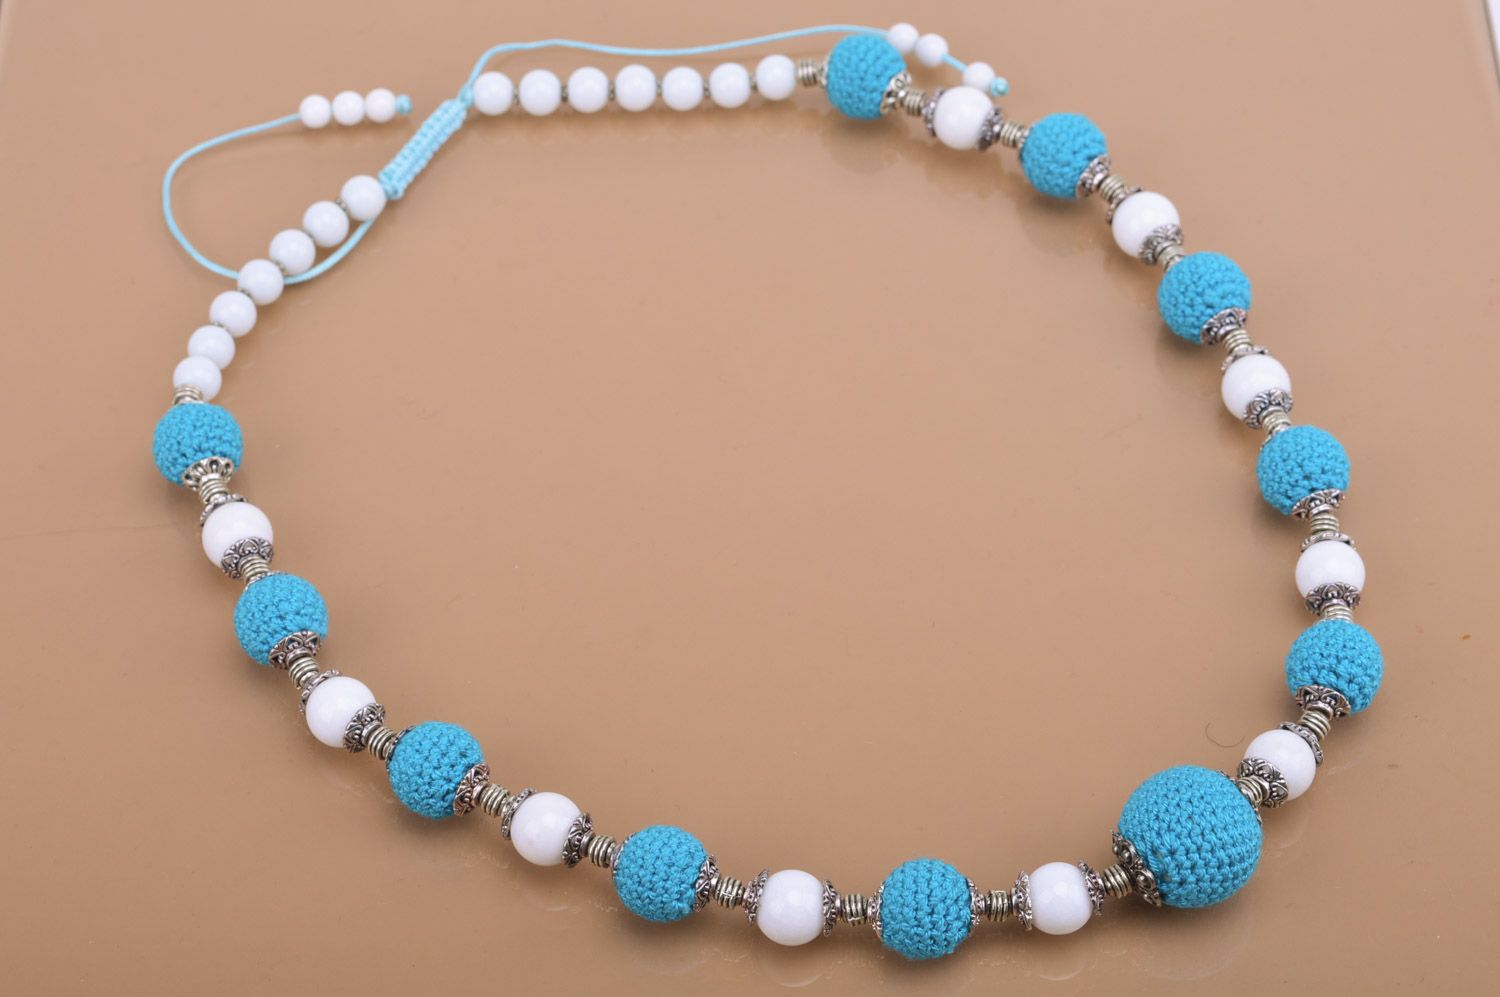 Handmade designer women's white and blue necklace with crochet over beads photo 2